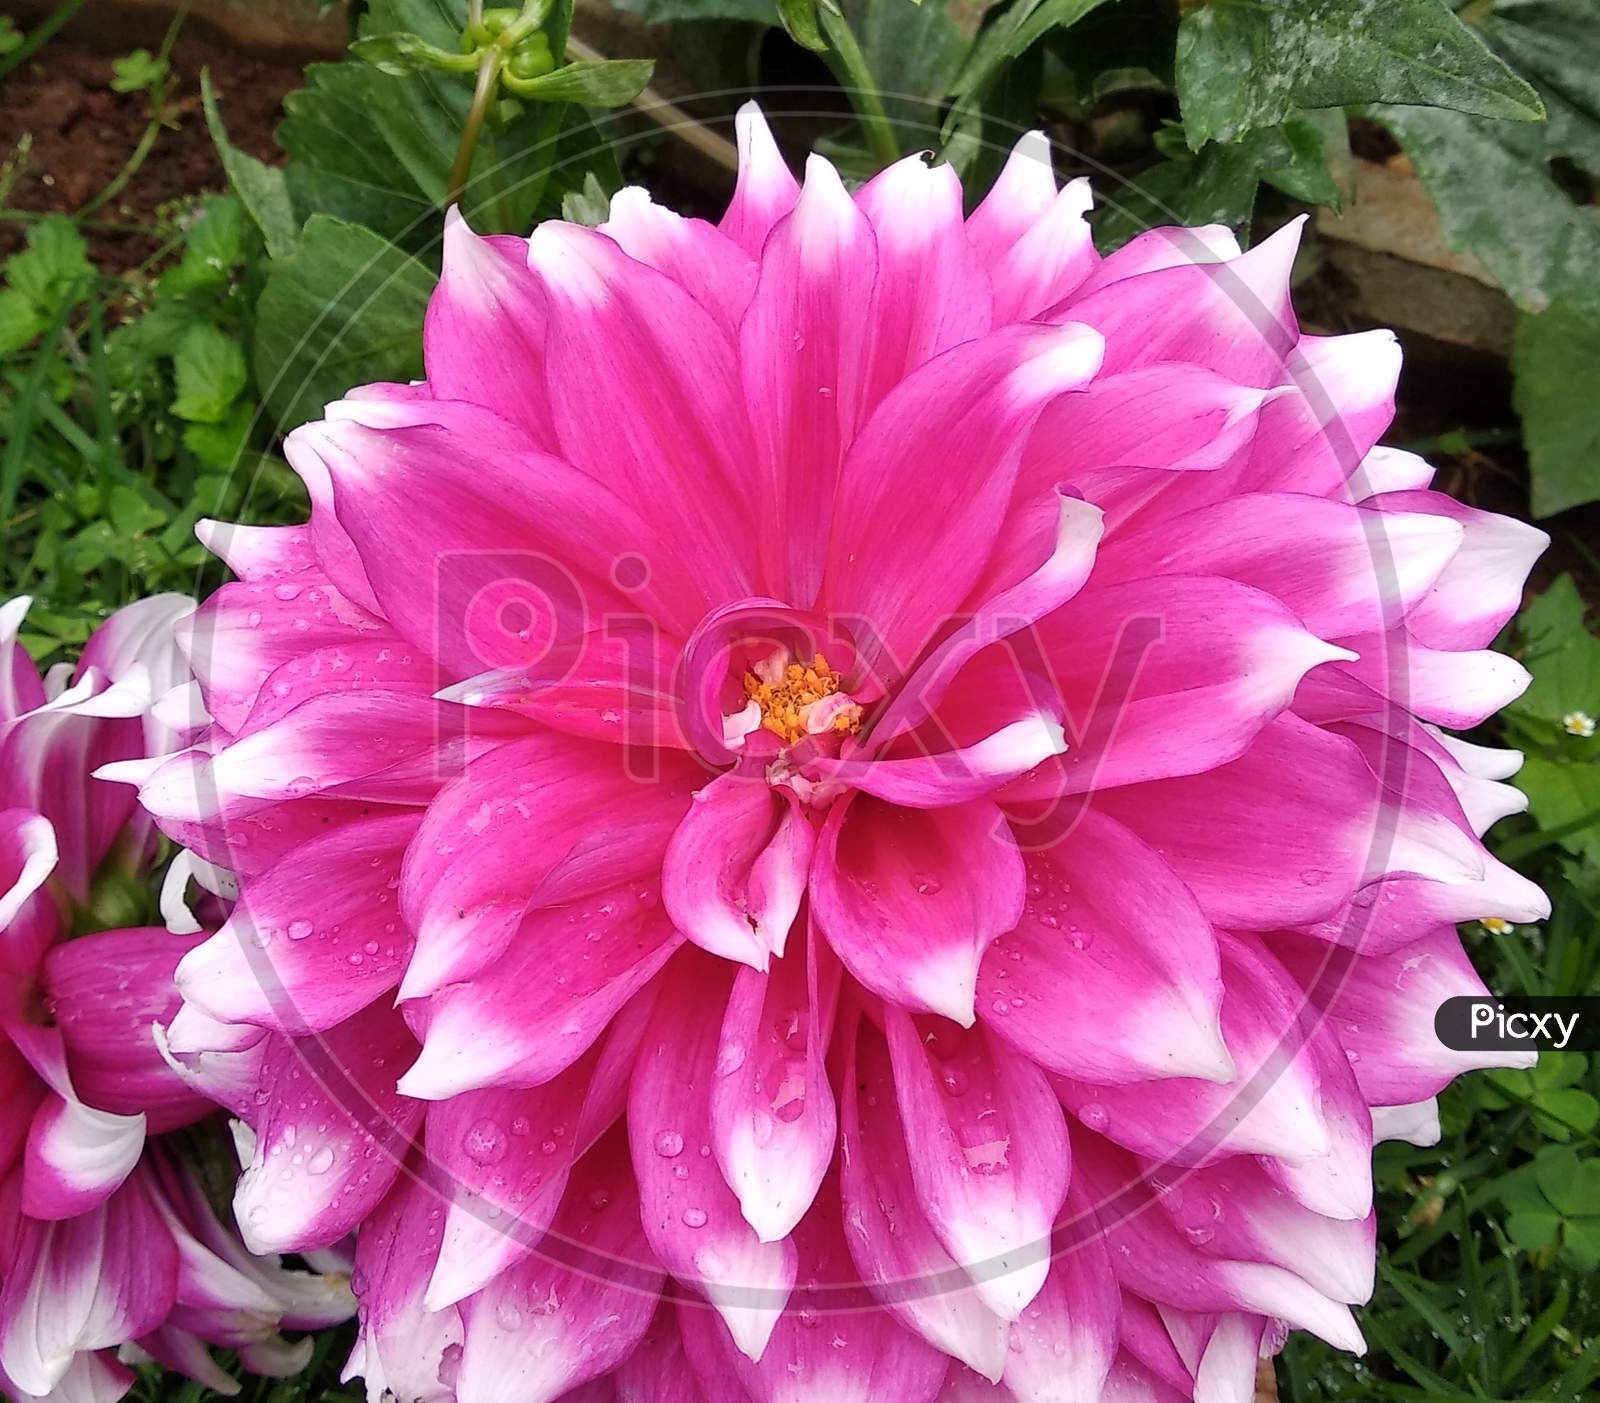 Pink and white dhalia flower